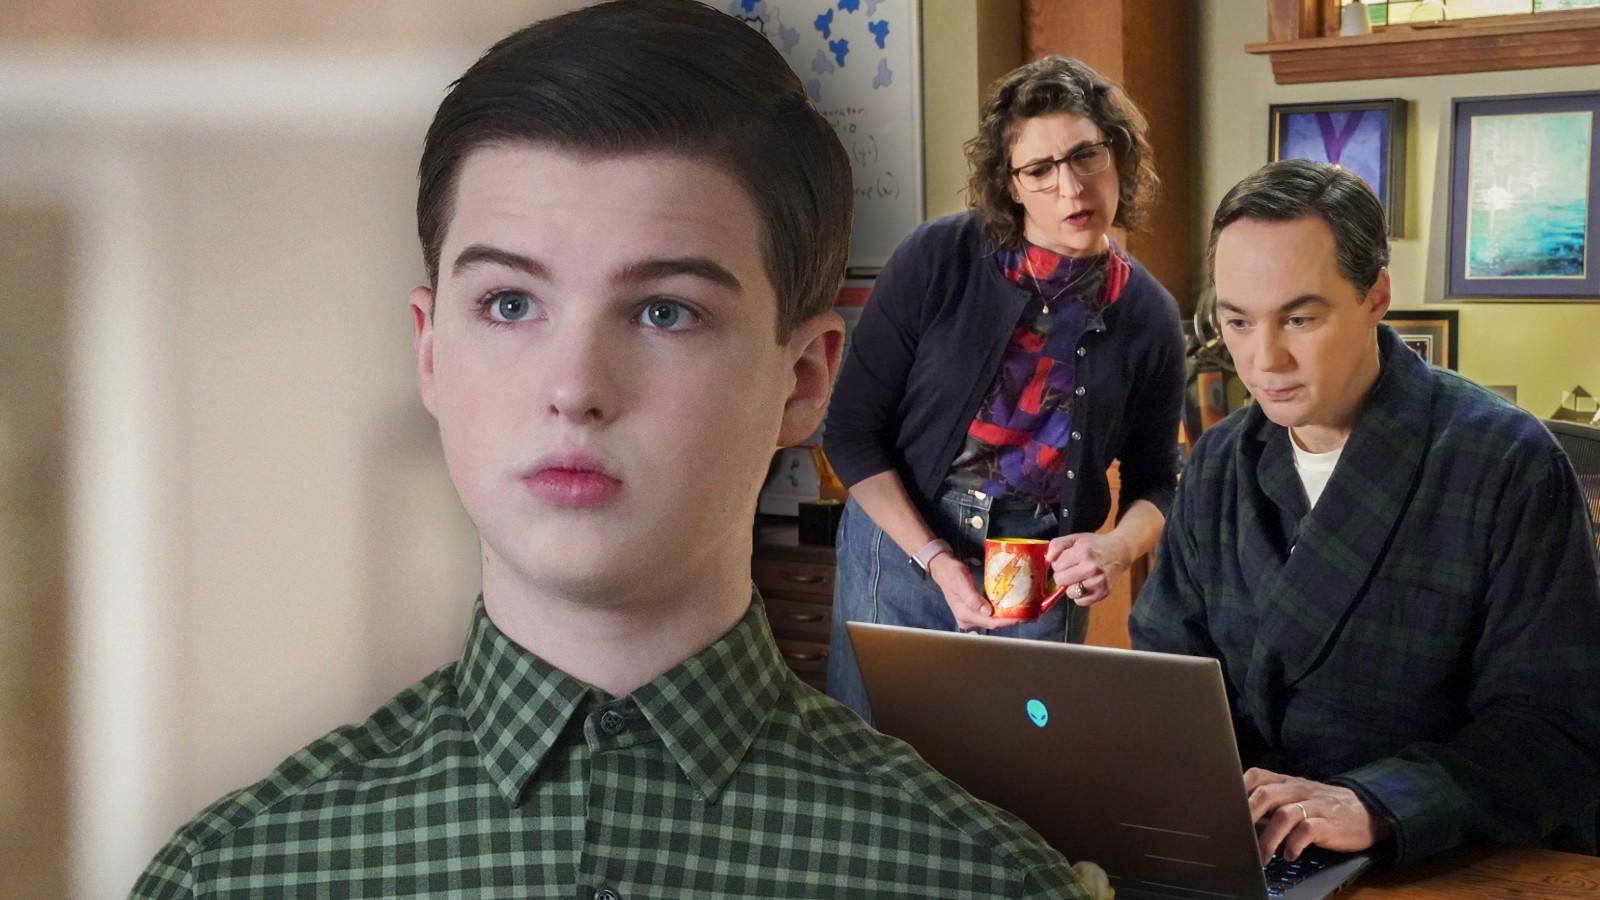 Iain Armitage in Young Sheldon, and Mayim Bialik and Jim Parsons from The Big Bang Theory